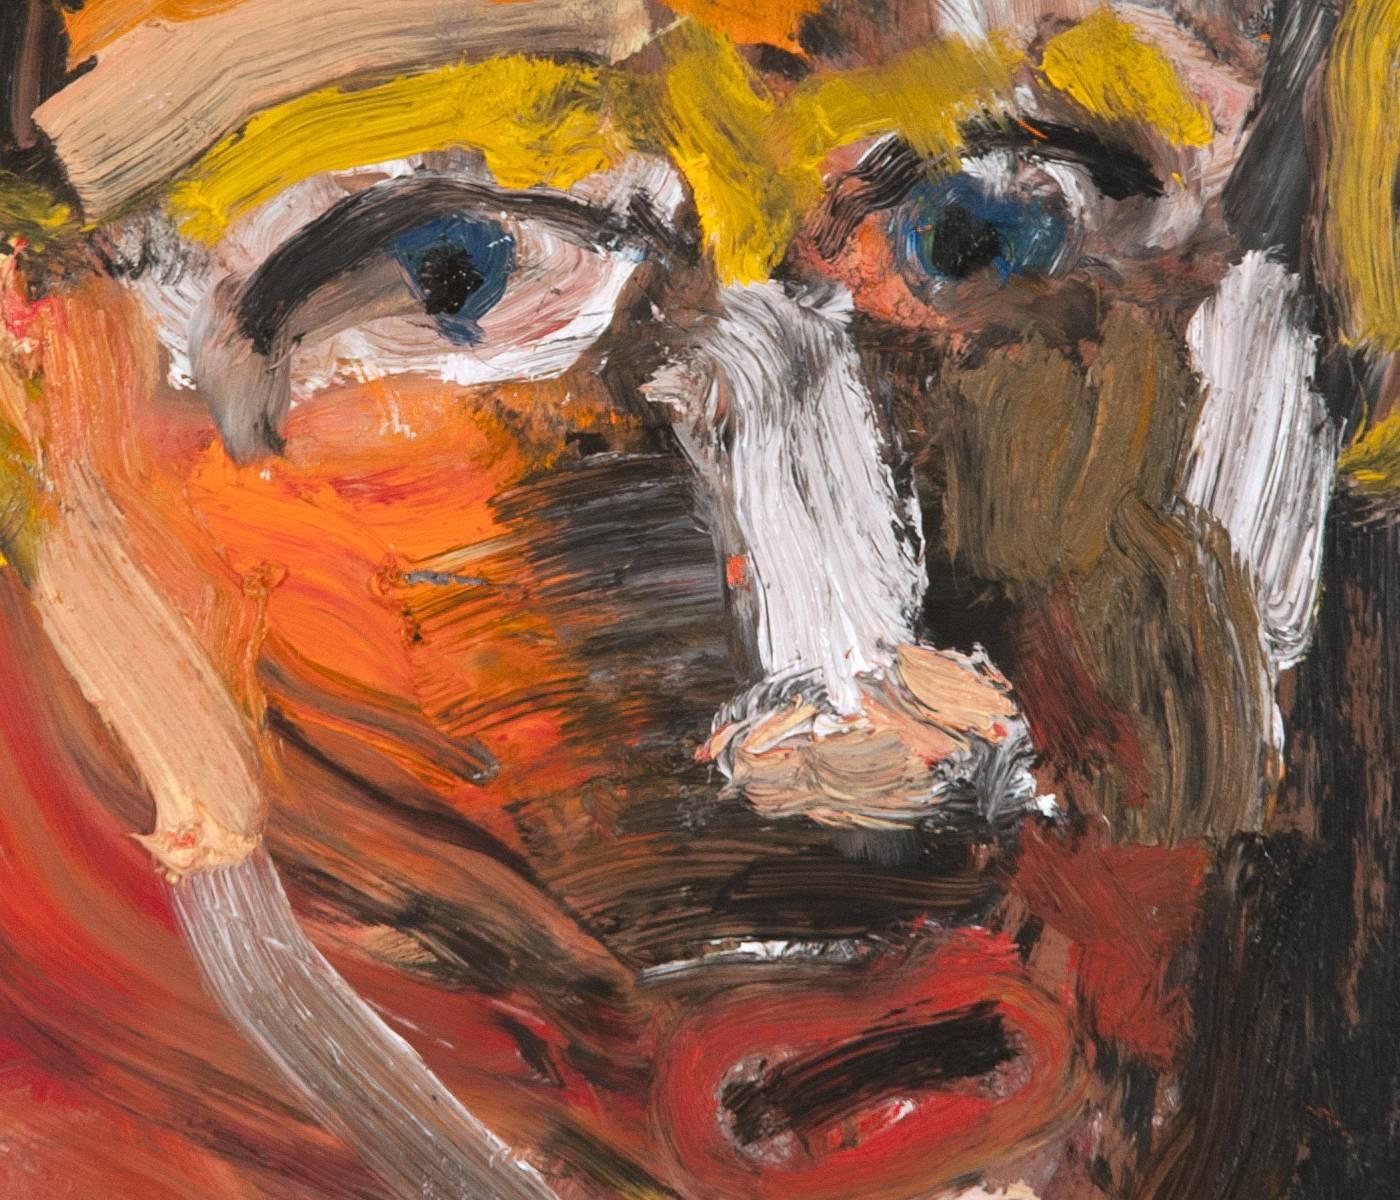 Michael Hafftka, One Who Doesn't Know How to Ask, expressionist portrait of man 2